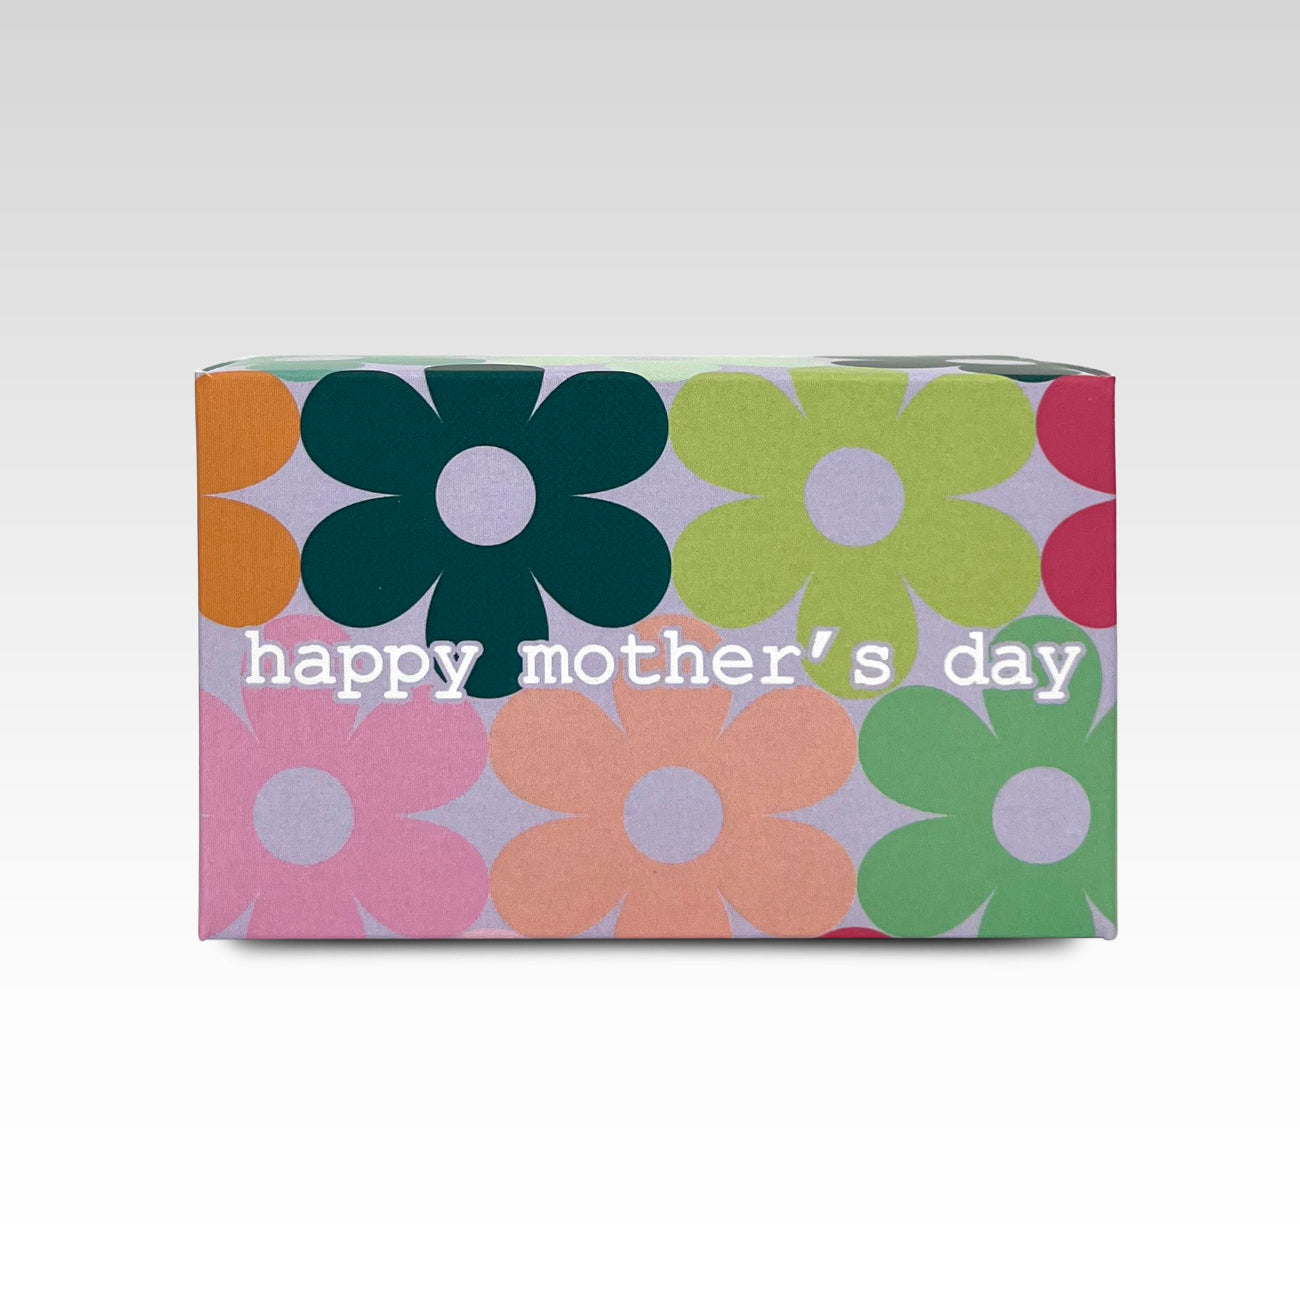 Mill & Hide - Rhicreative - Soap Happy Mother's Day